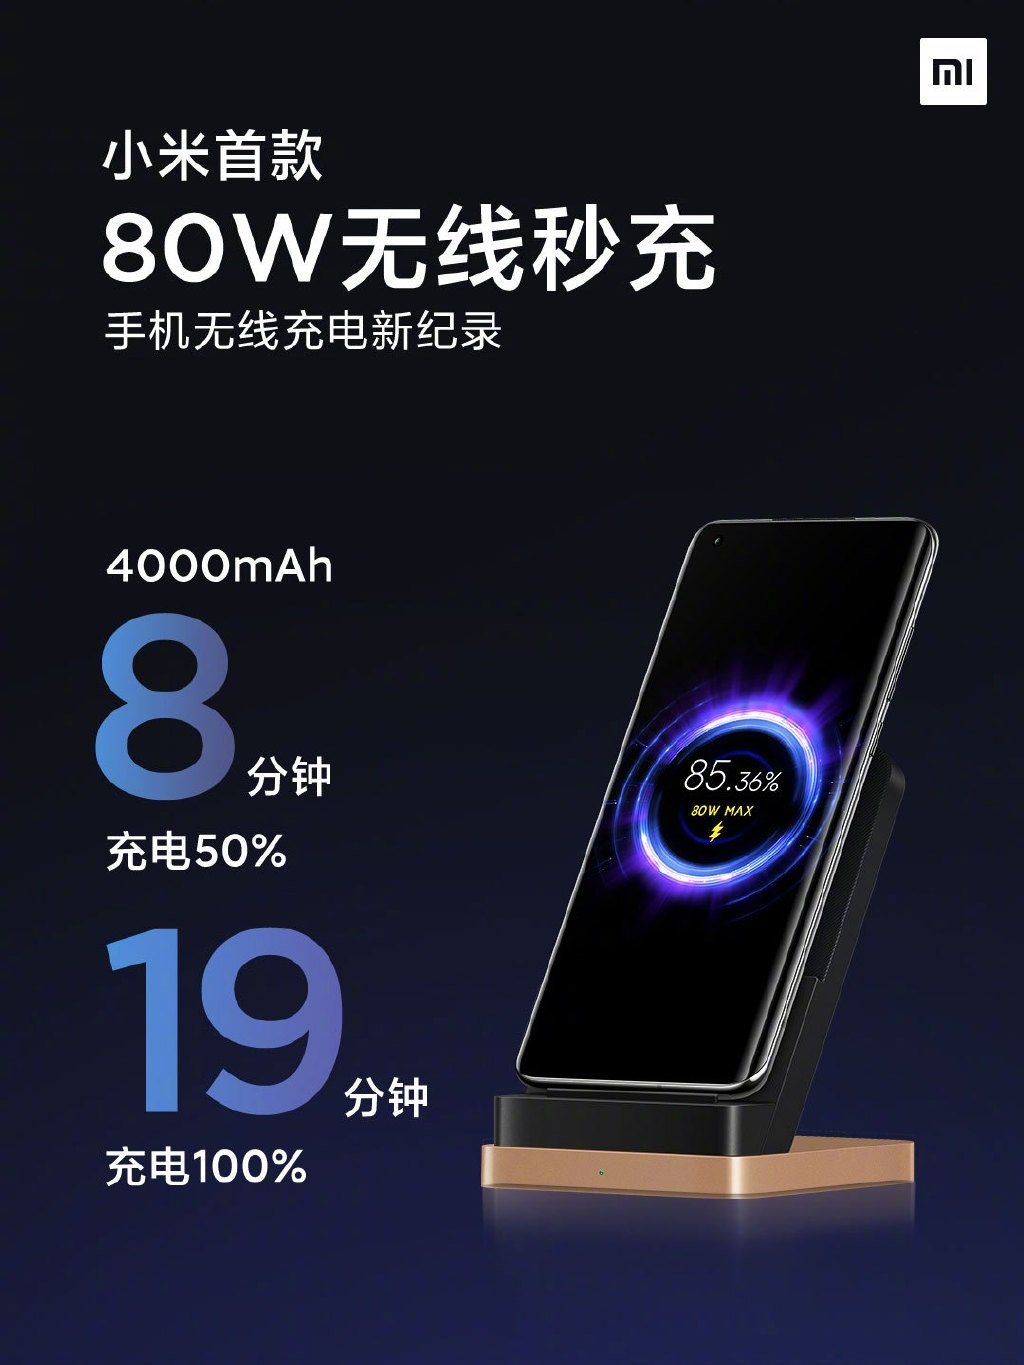 Xiaomi announces 80W wireless charging technology that fully charges 4000mAh battery in 19 minutes